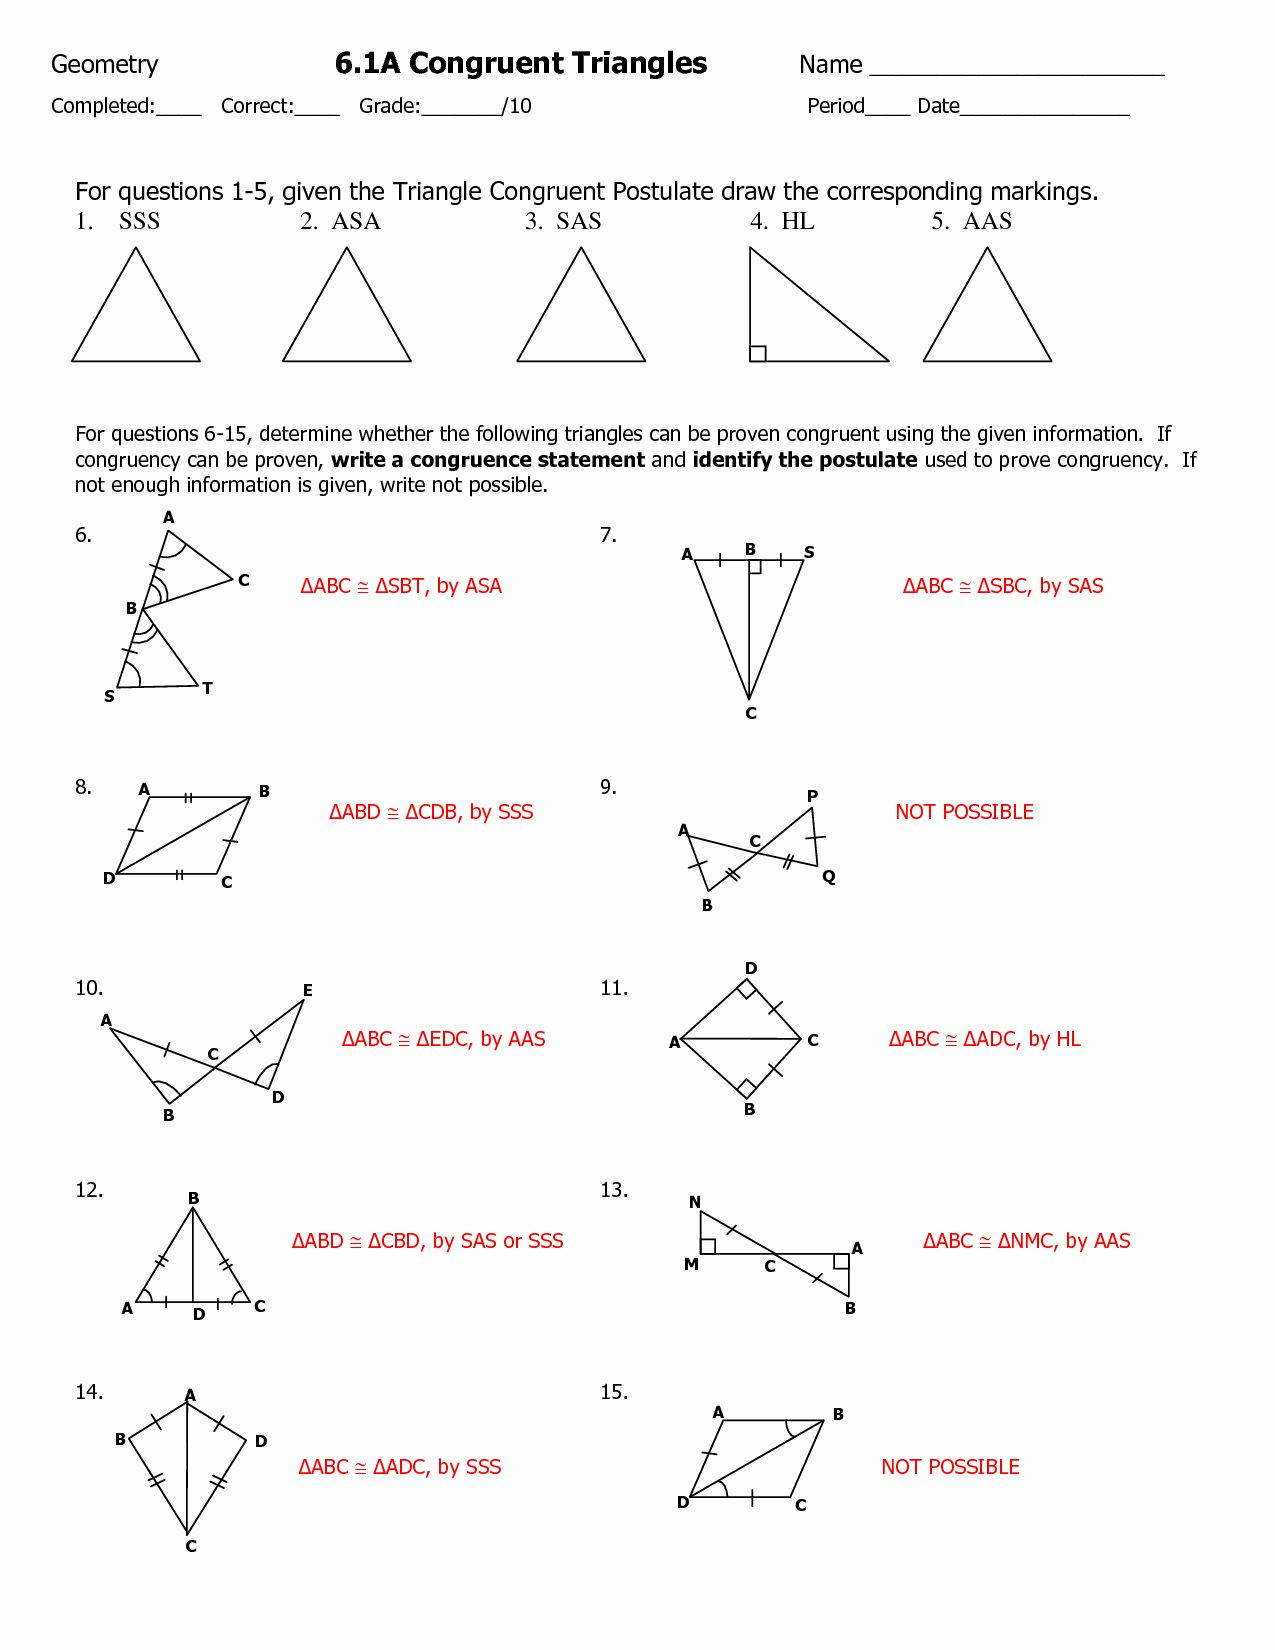 Triangle Congruence Proof Worksheet 50 Congruent Triangles Worksheet with Answer In 2020 with